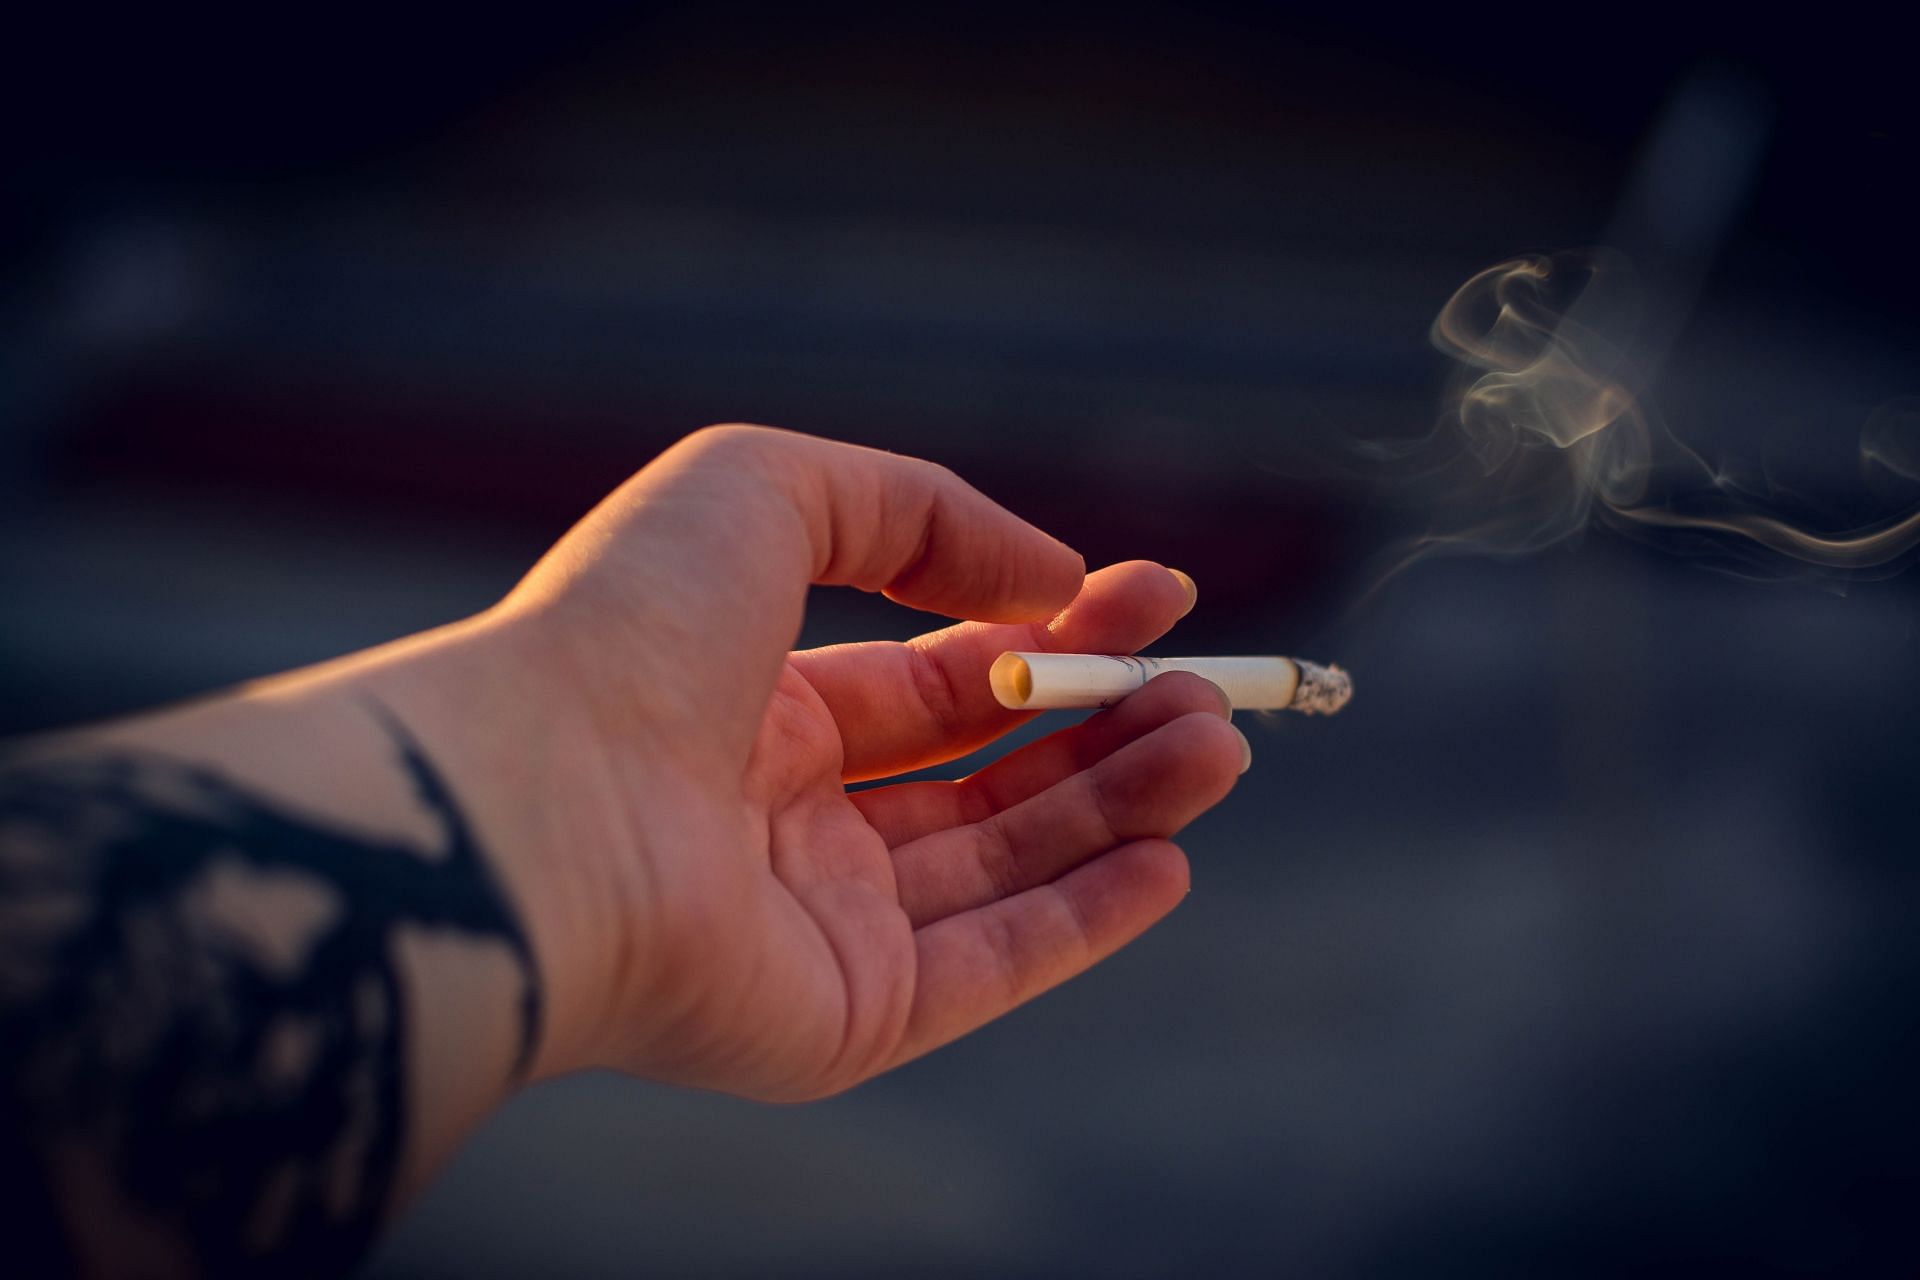 The toxic substances in cigarette smoke, such as carbon monoxide, reduce the amount of oxygen that can be carried by red blood cells.(Image via Pexels)